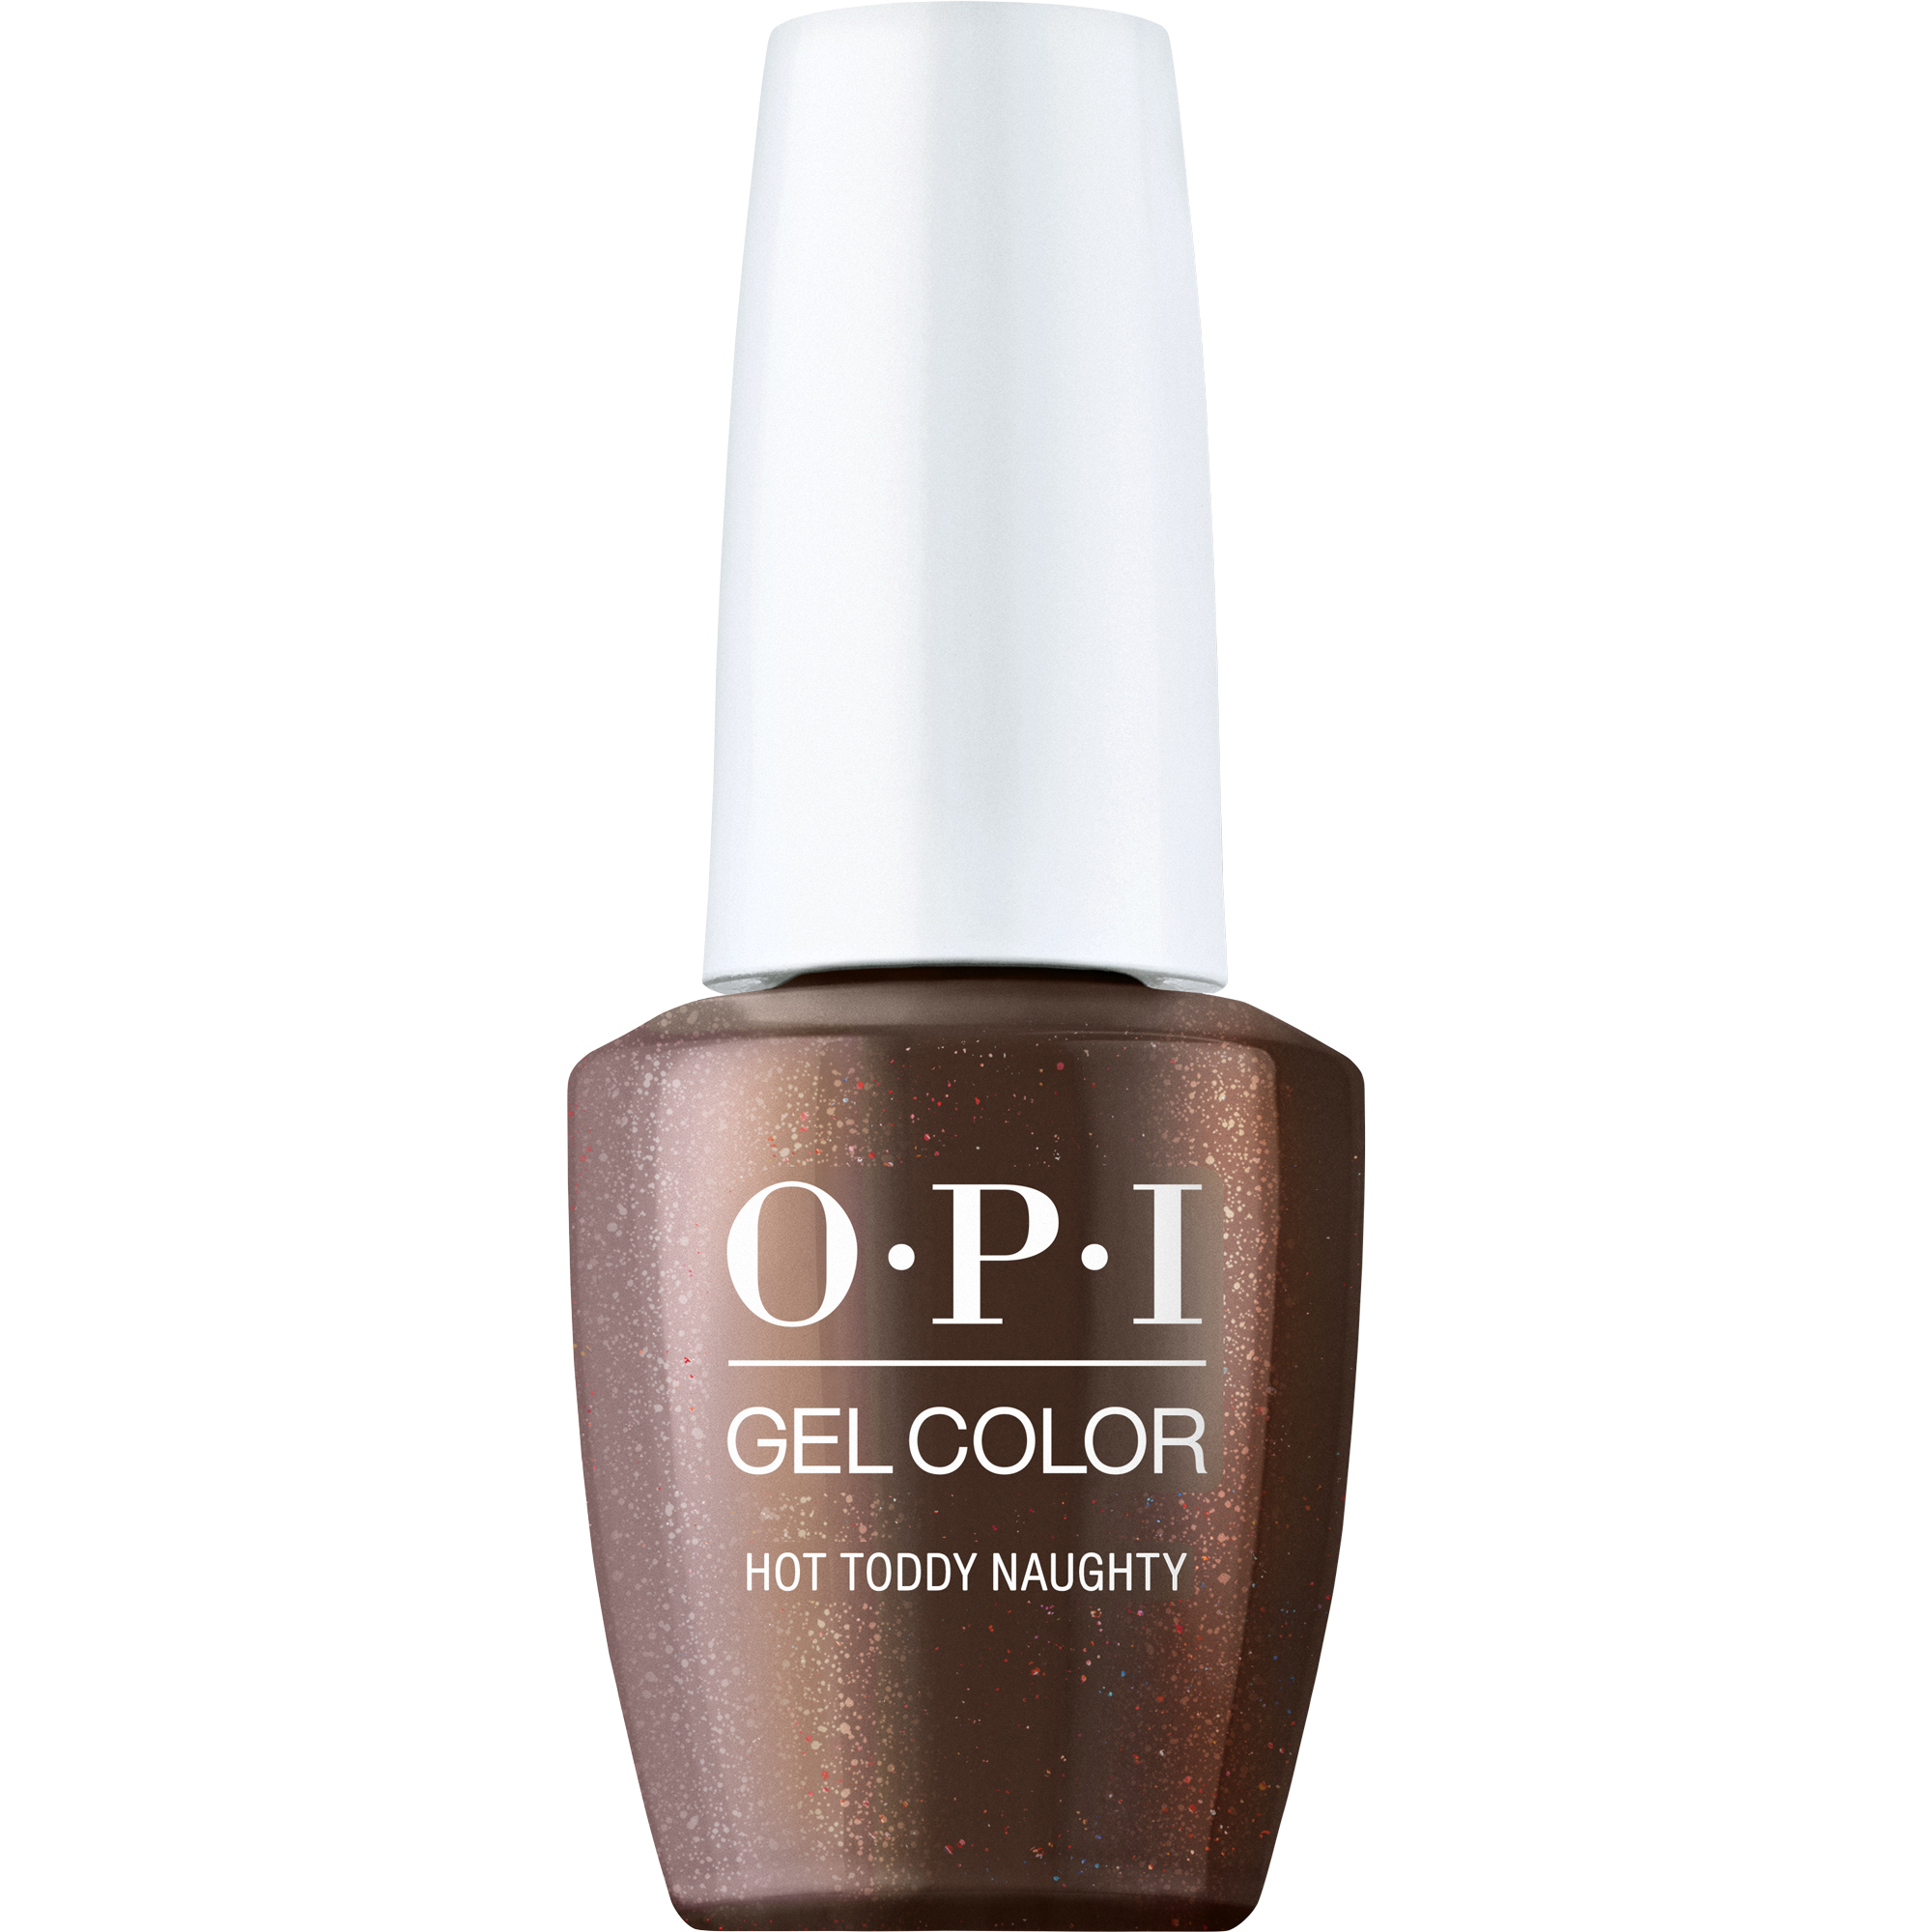 OPI Gel Color 360 - Hot Toddy Naughty